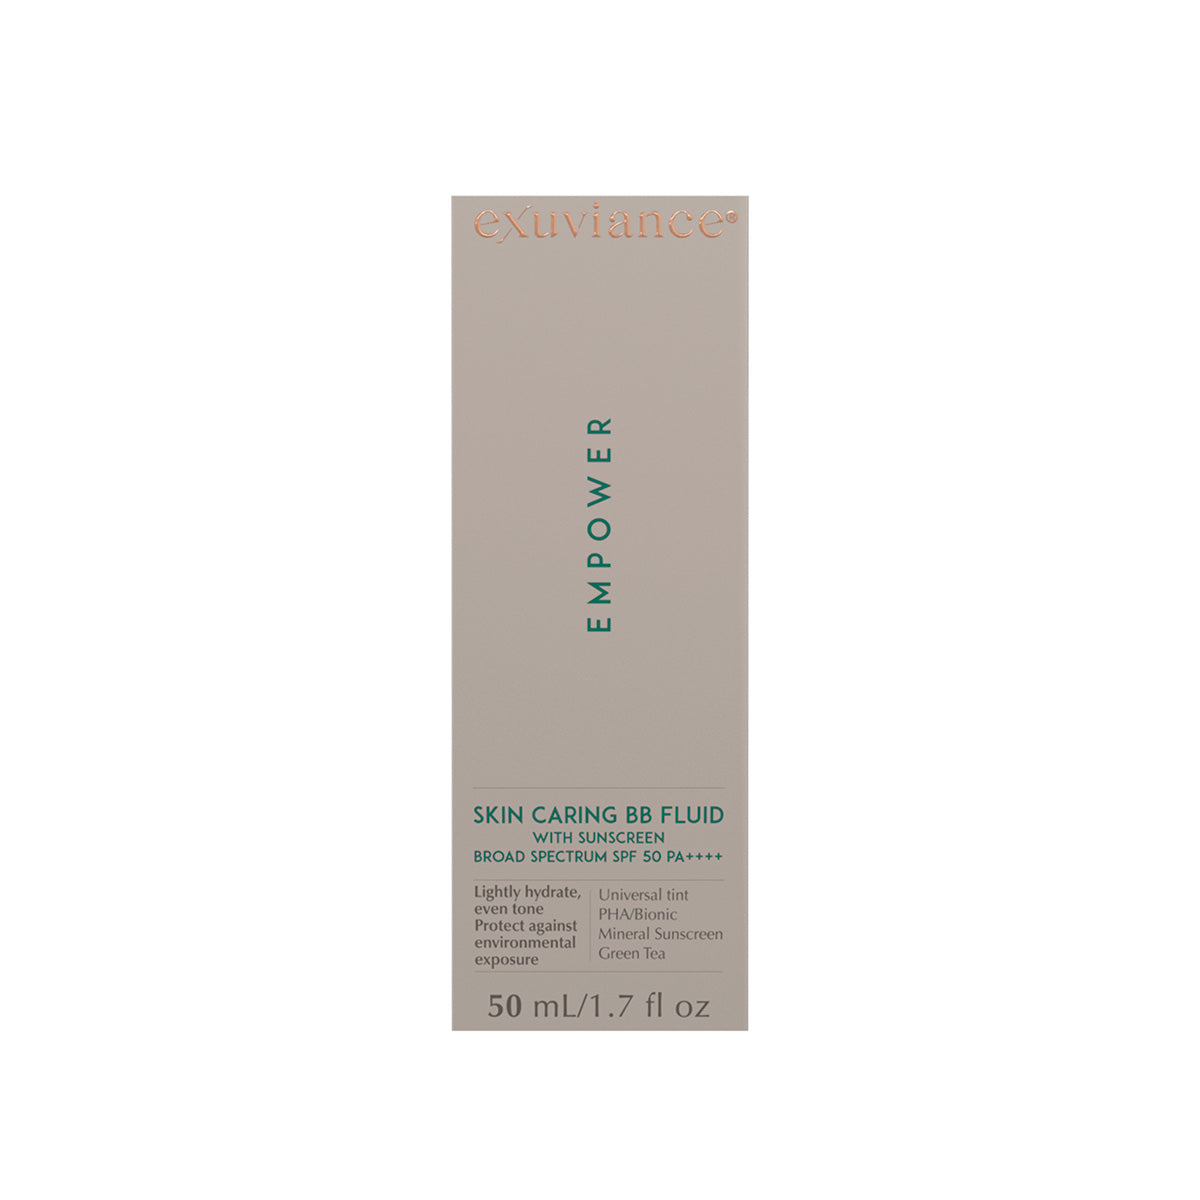 Skin Caring BB Fluid with Sunscreen Broad Spectrum SPF 50 PA++++, 50ml